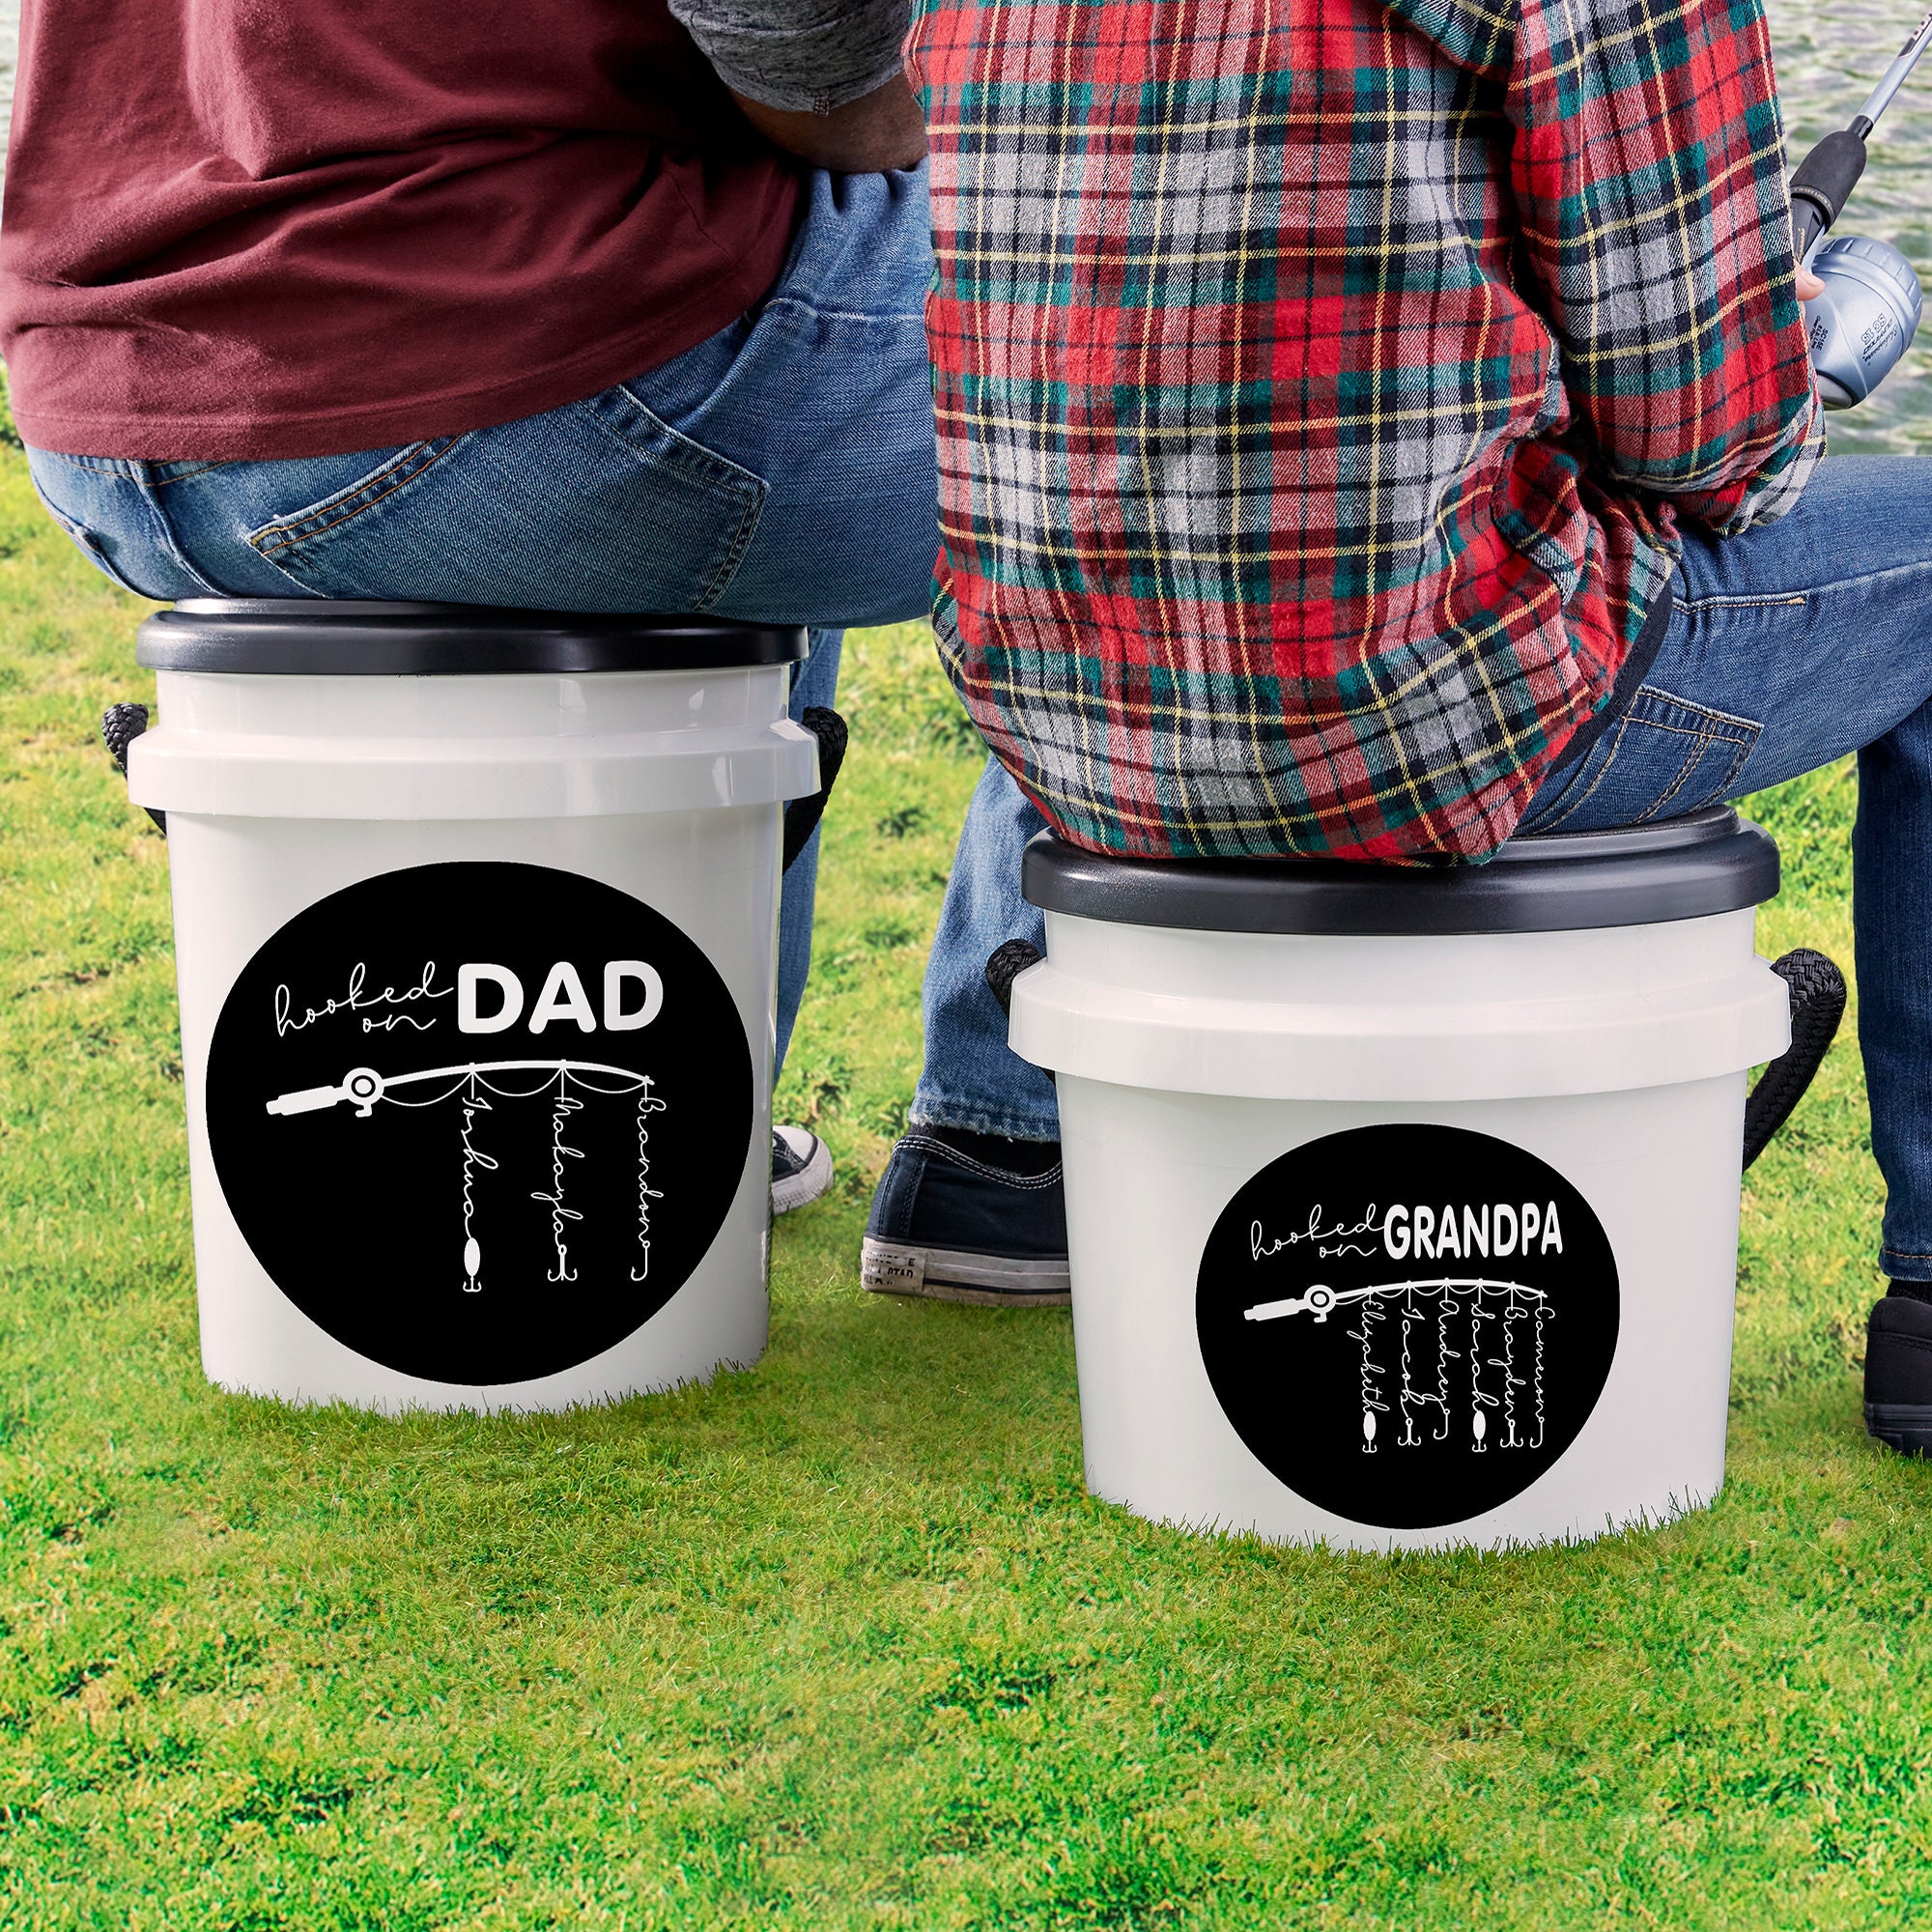 Hooked on Dad Personalized Fishing Bucket Seat, Personalized Gifts for Dad,  Fishing Gifts for Men, Fathers Day Gift, Grandpa Gifts -  Finland